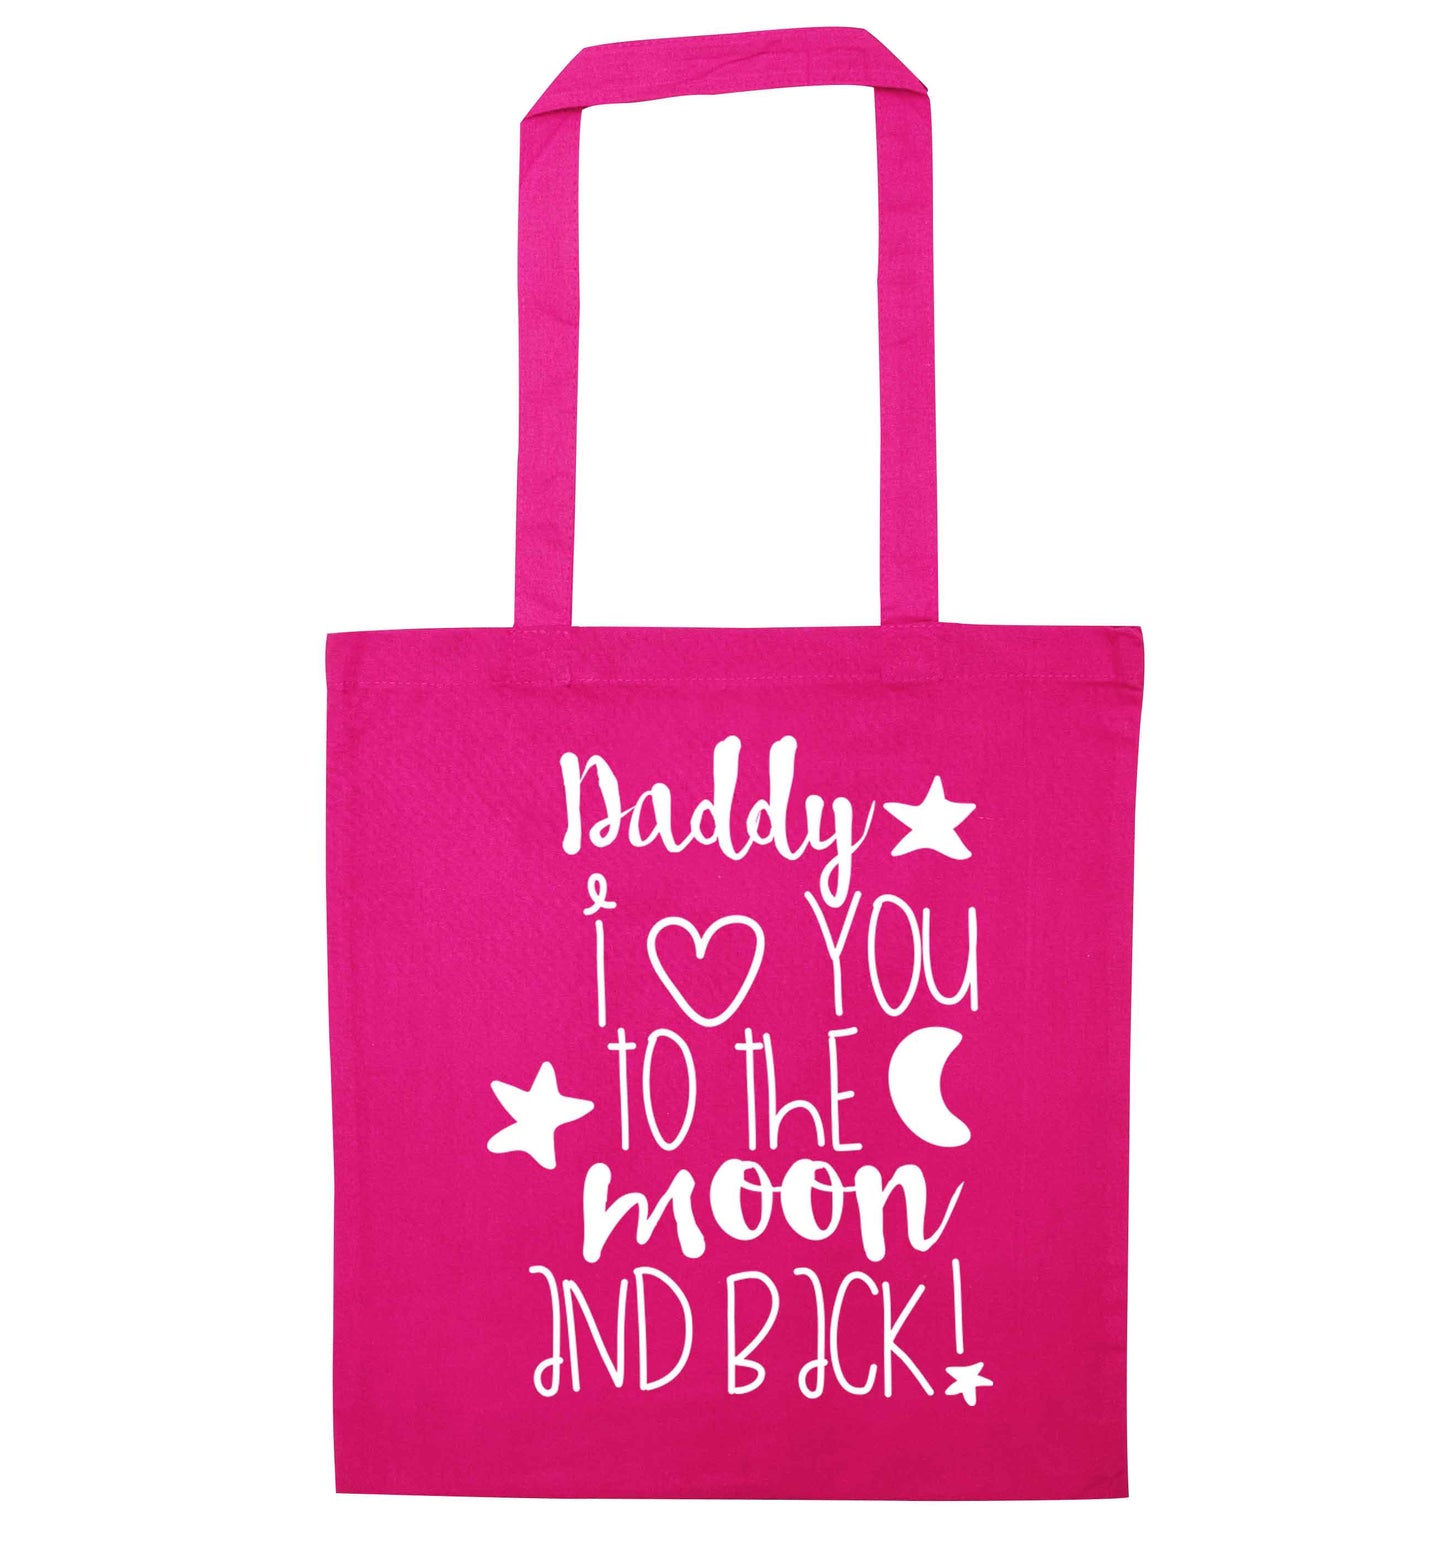 Daddy I love you to the moon and back pink tote bag